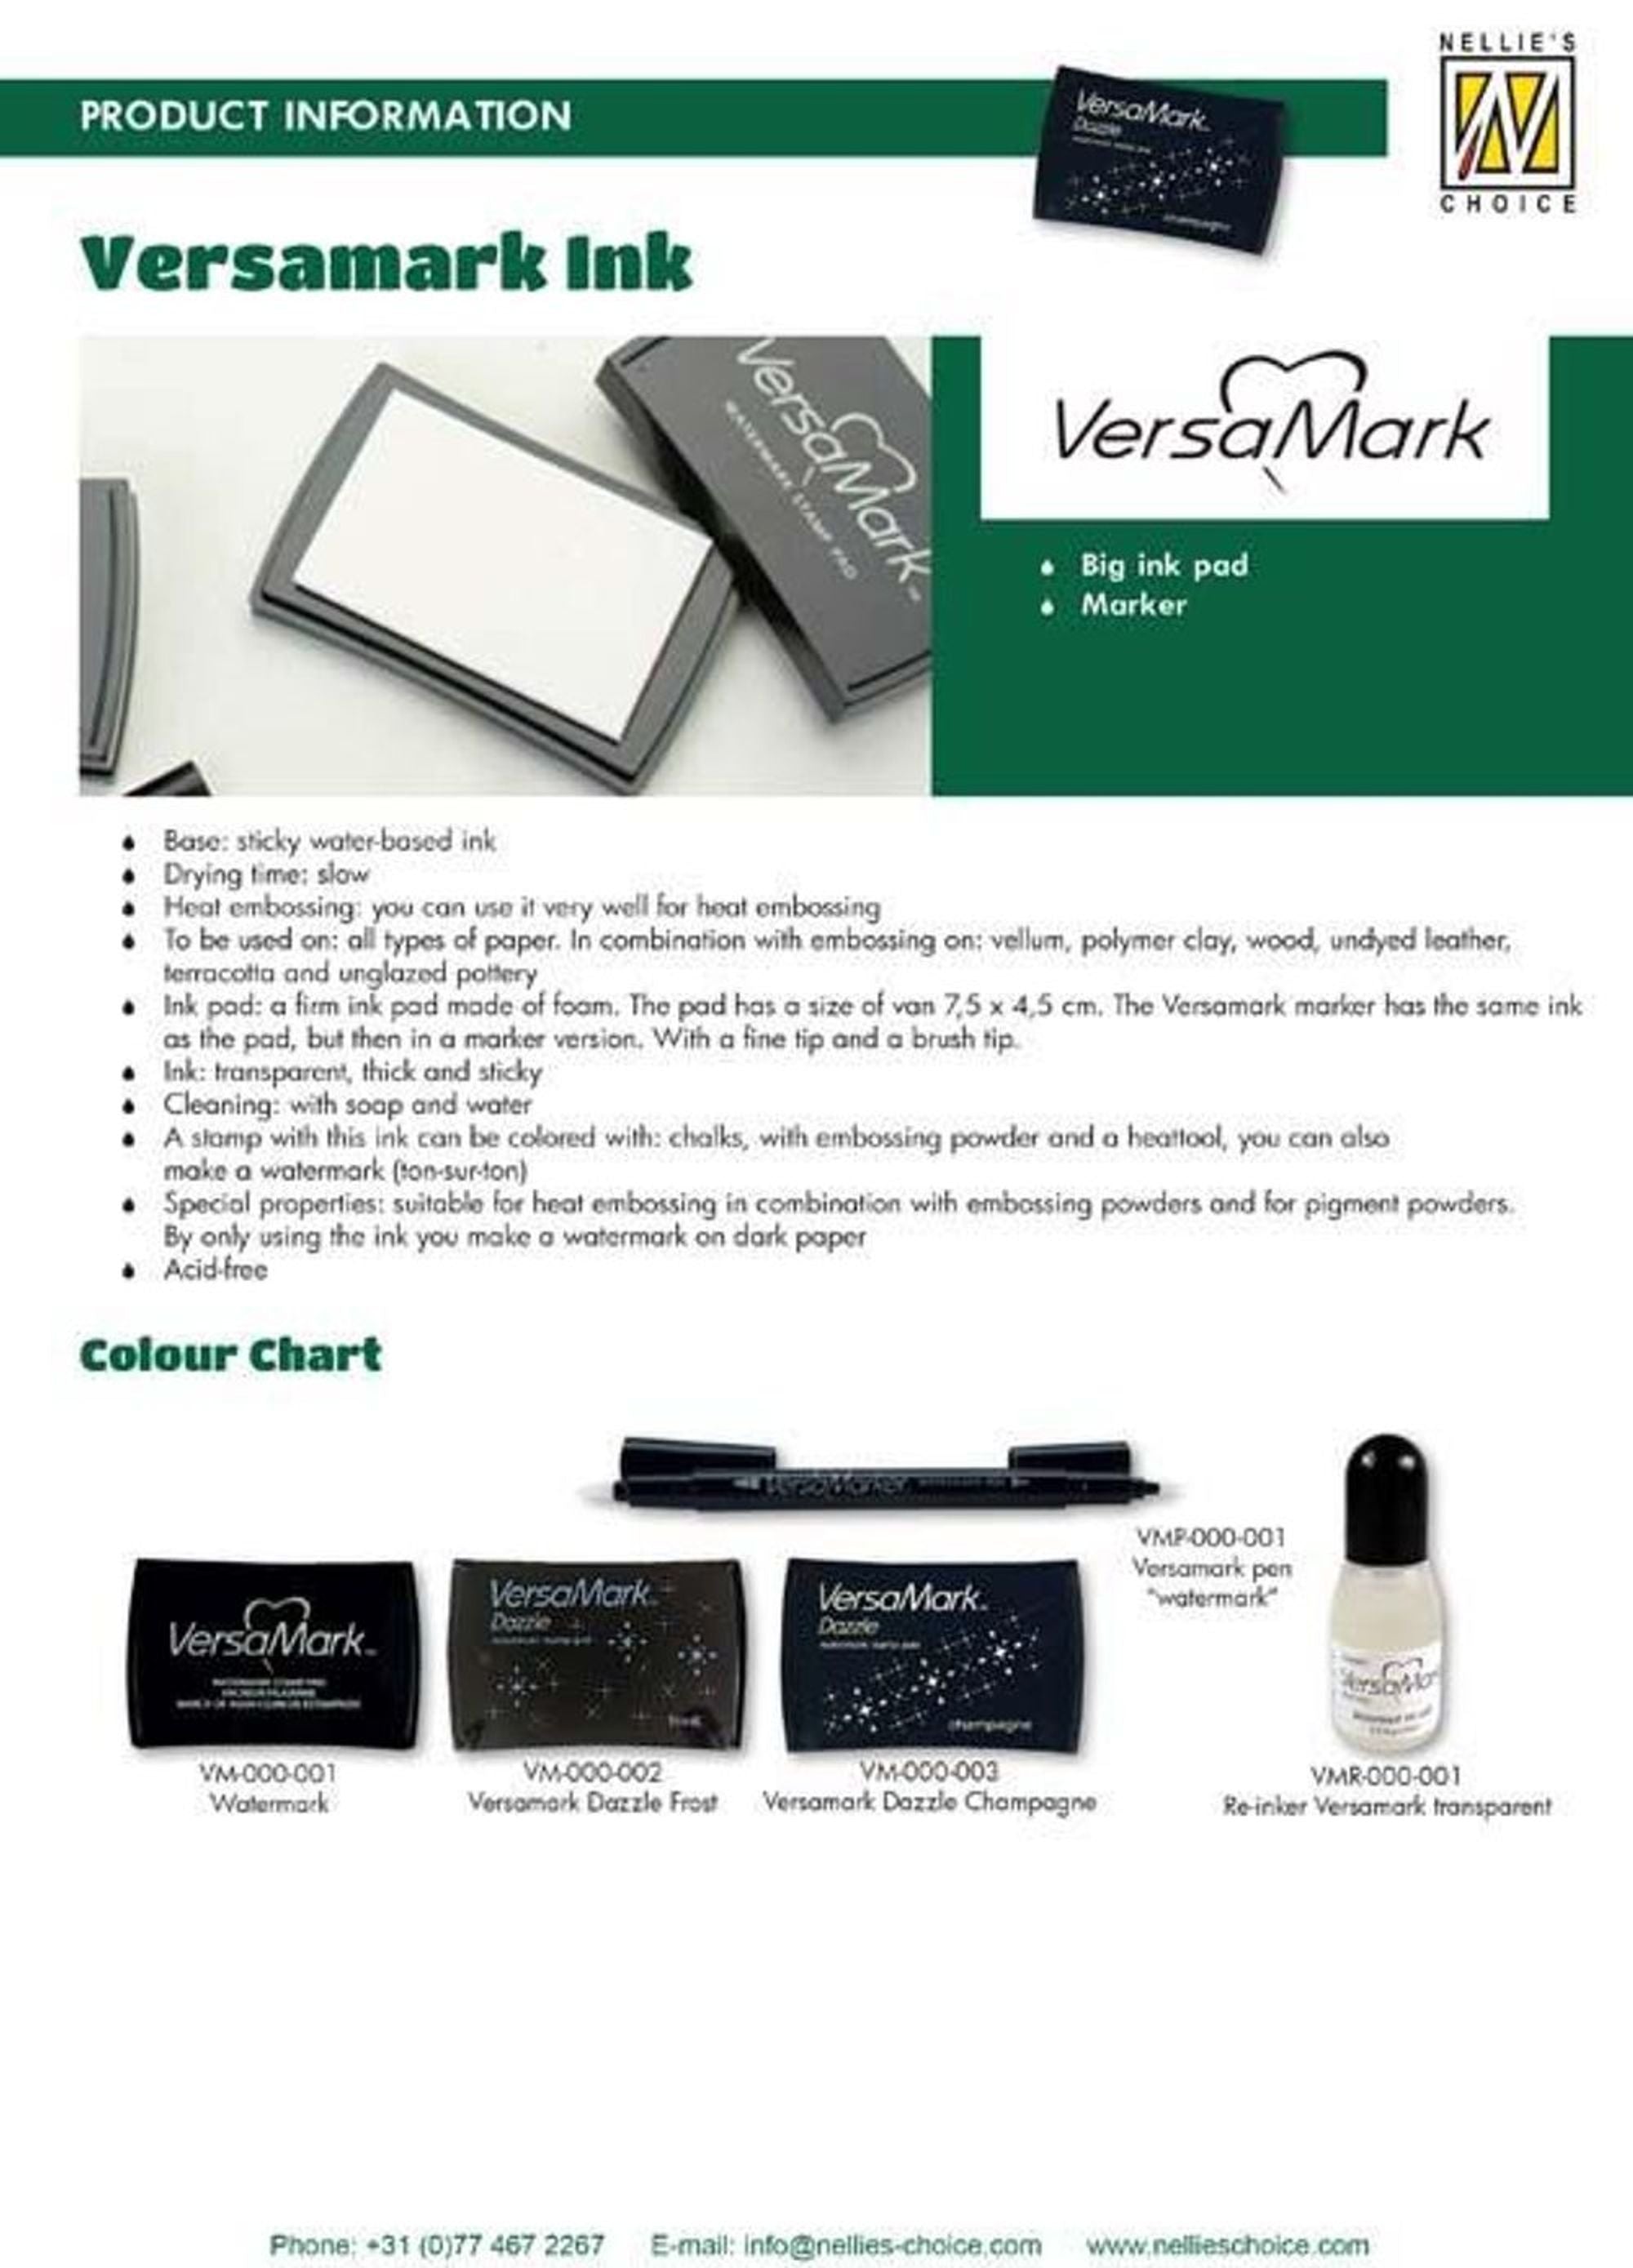 Green Stamp Pad Ink Refill, Old Olive Ink Refill